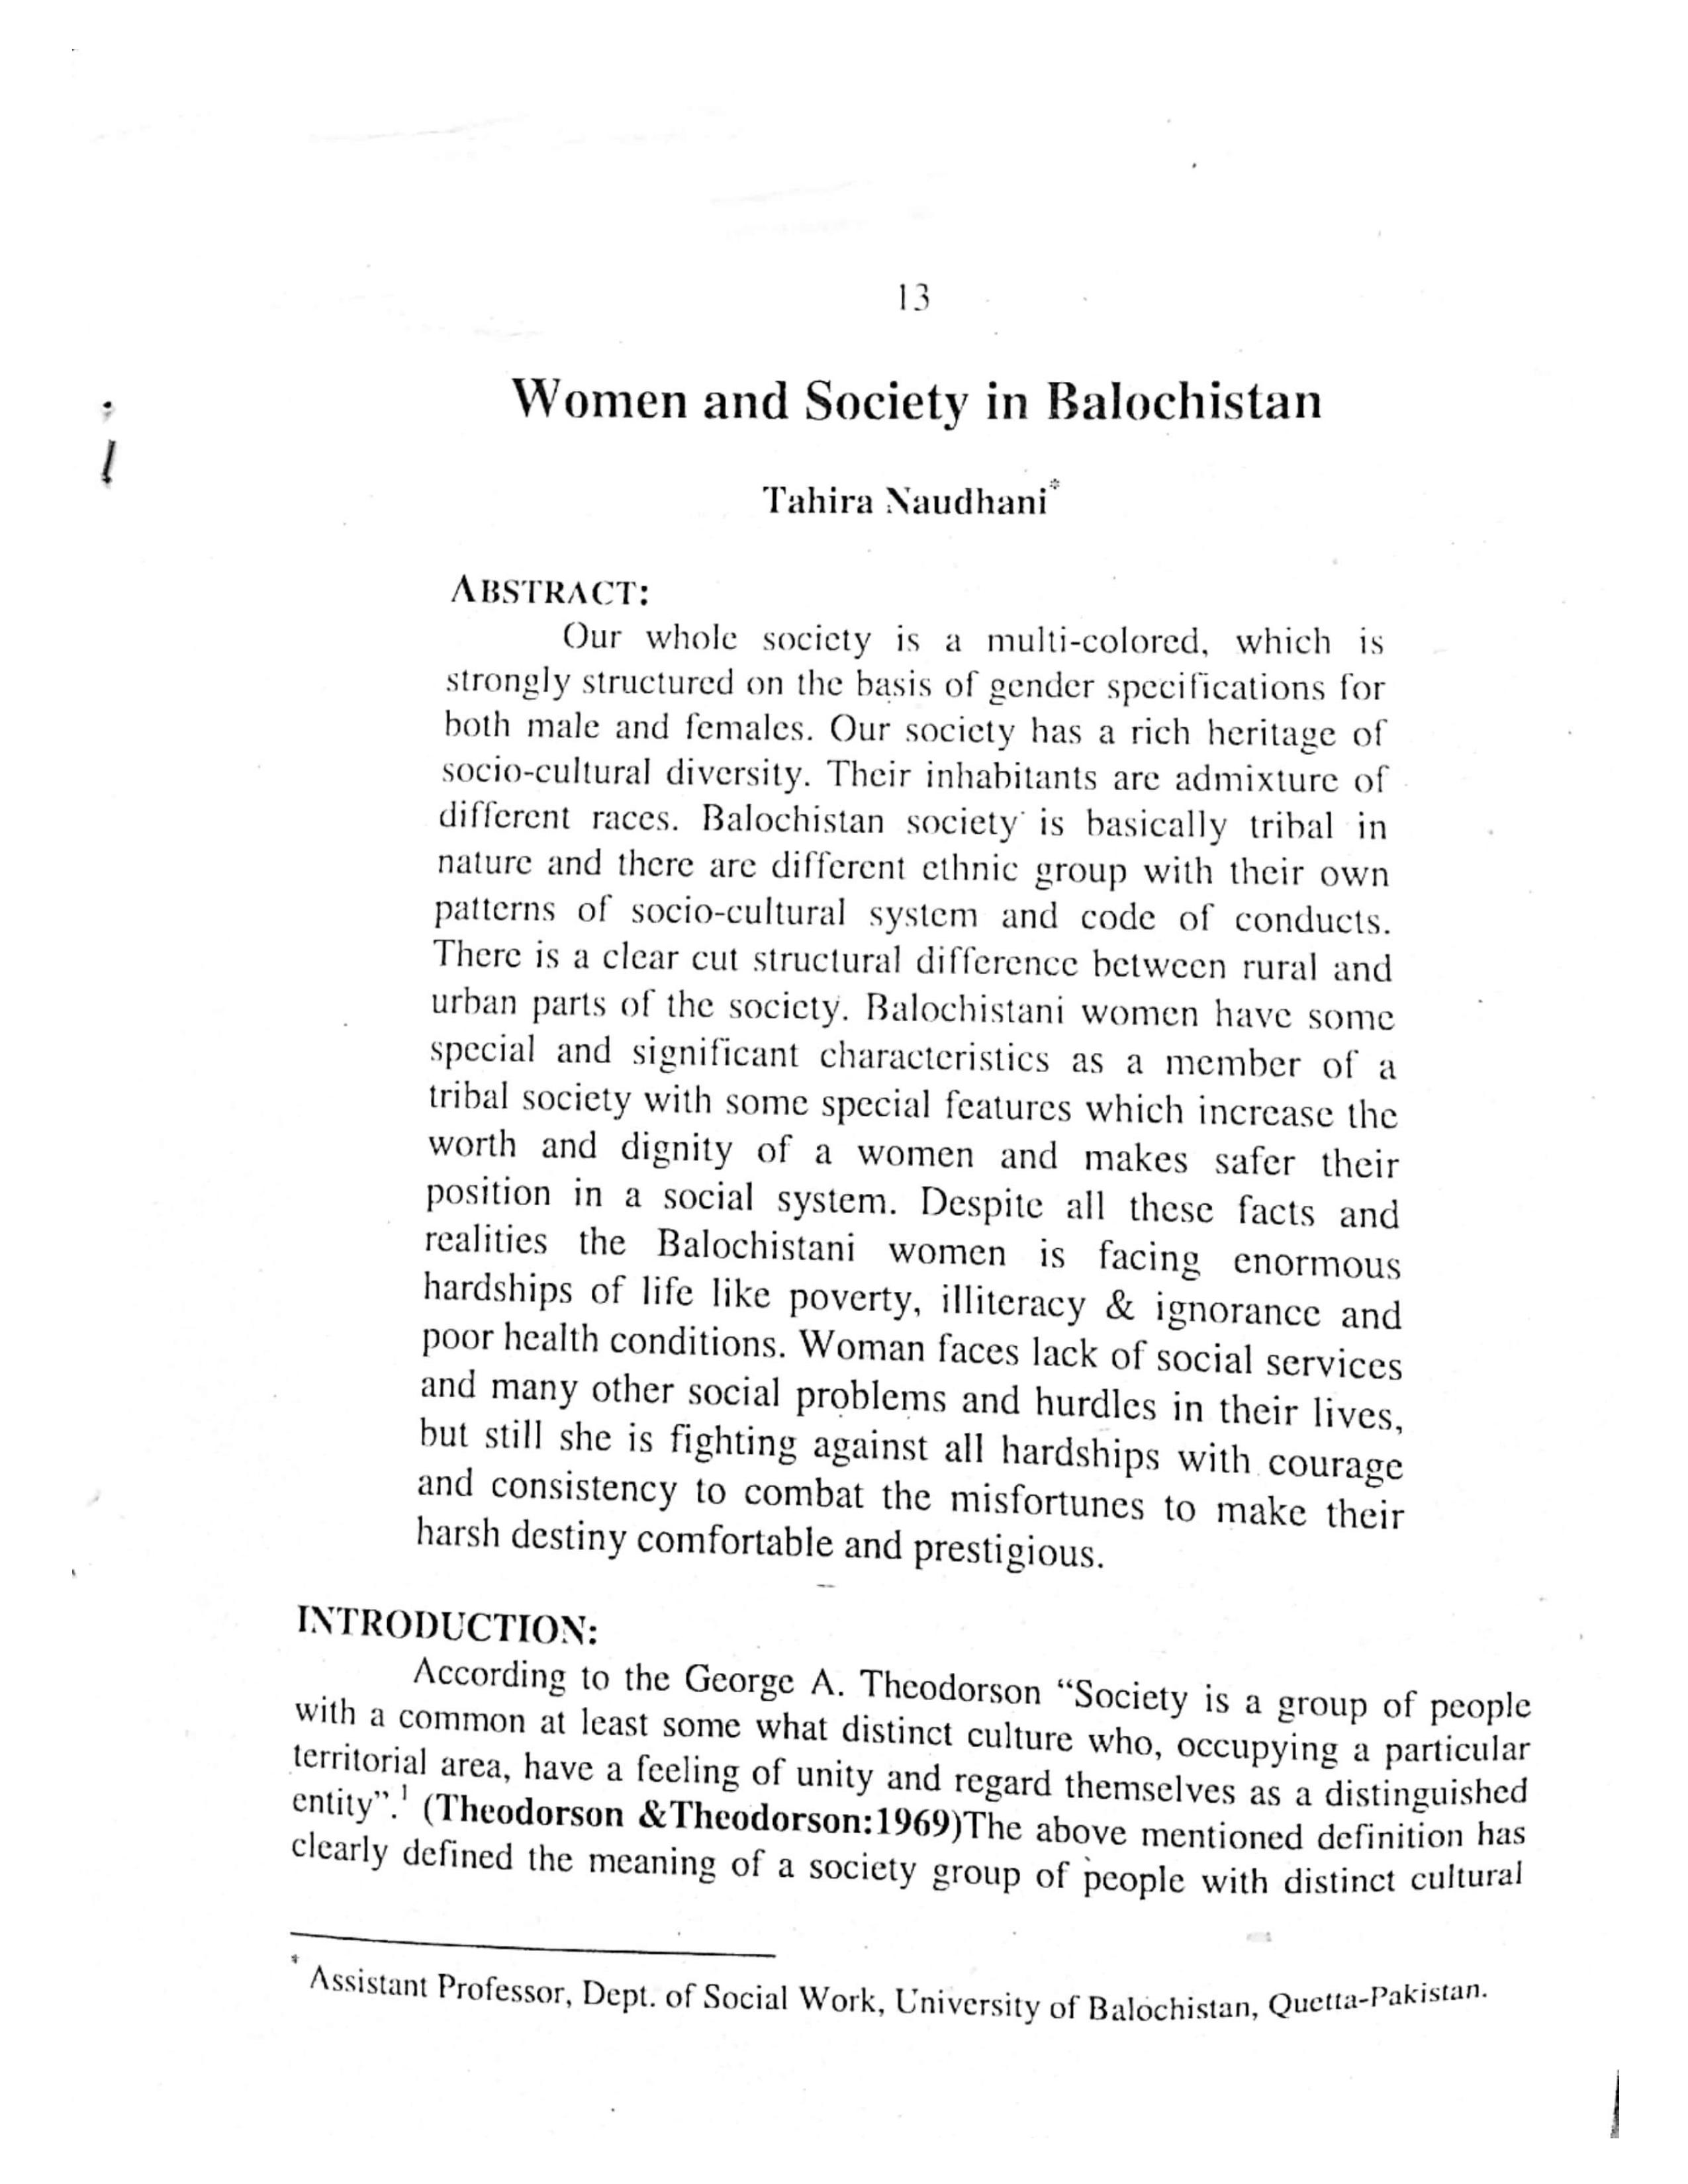 Women and Society in Balochistan